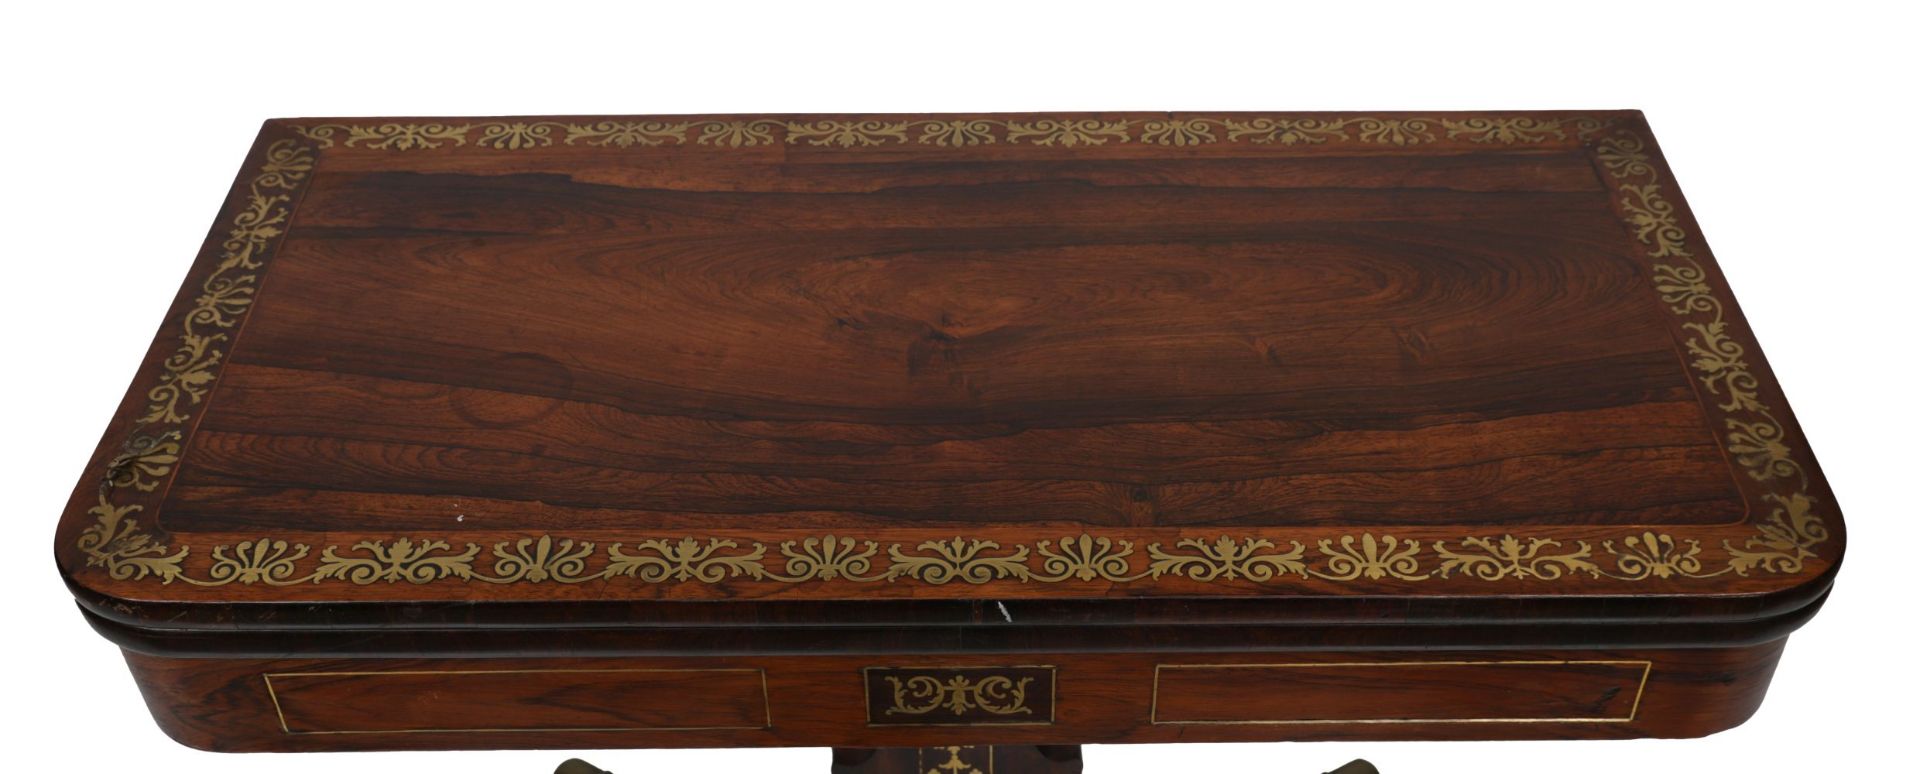 REGENCY ROSEWOOD & BRASS INLAID GAMES TABLE - Image 2 of 4